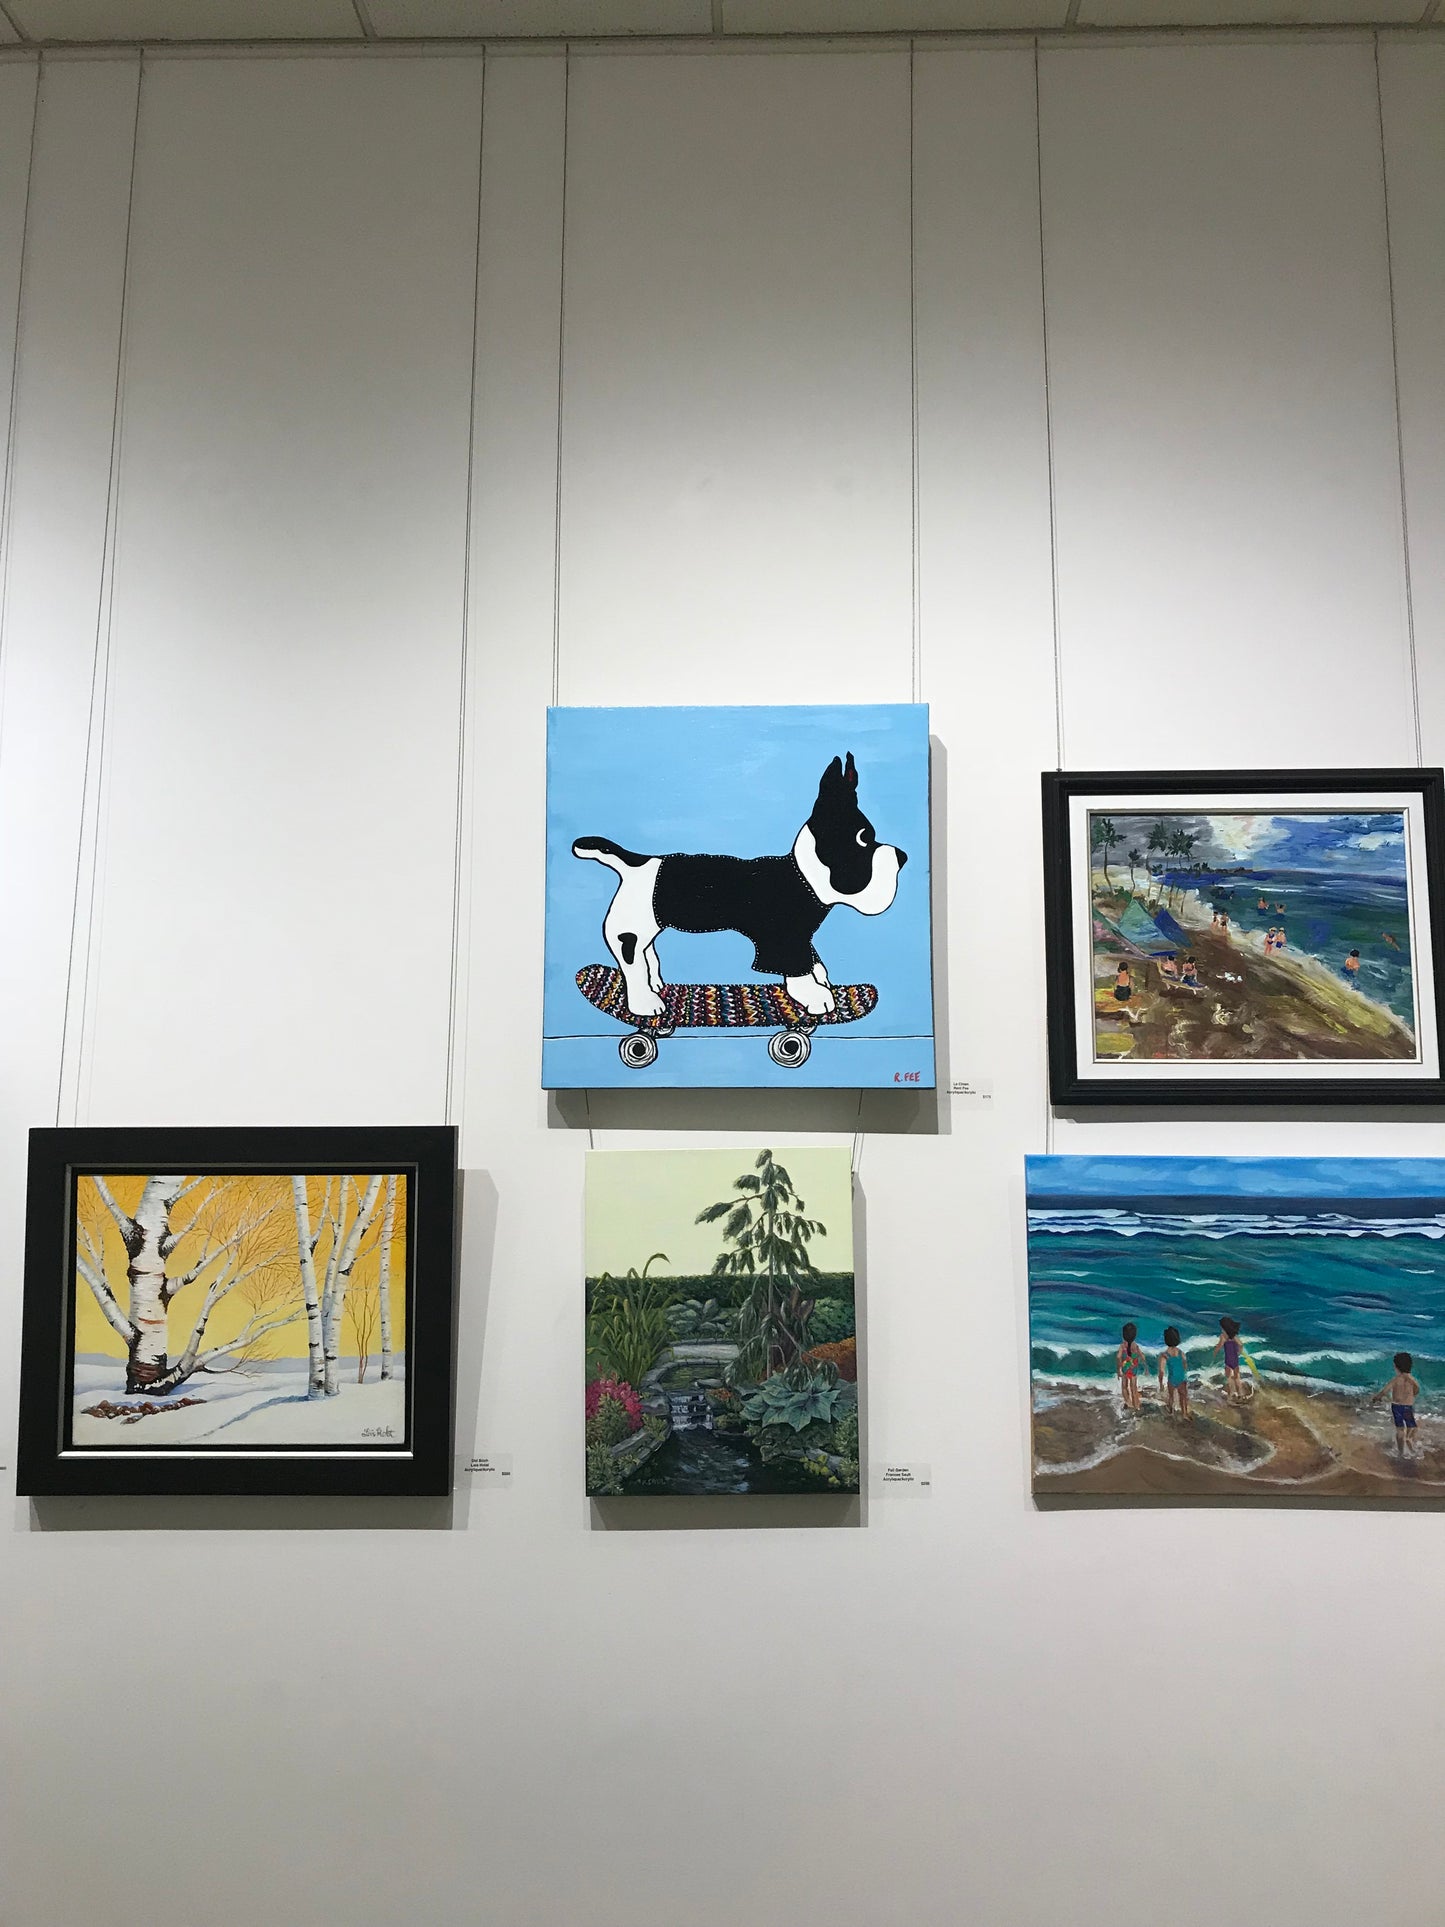 Le Chien - Original Artwork by Reni Fee hanging in a gallery.